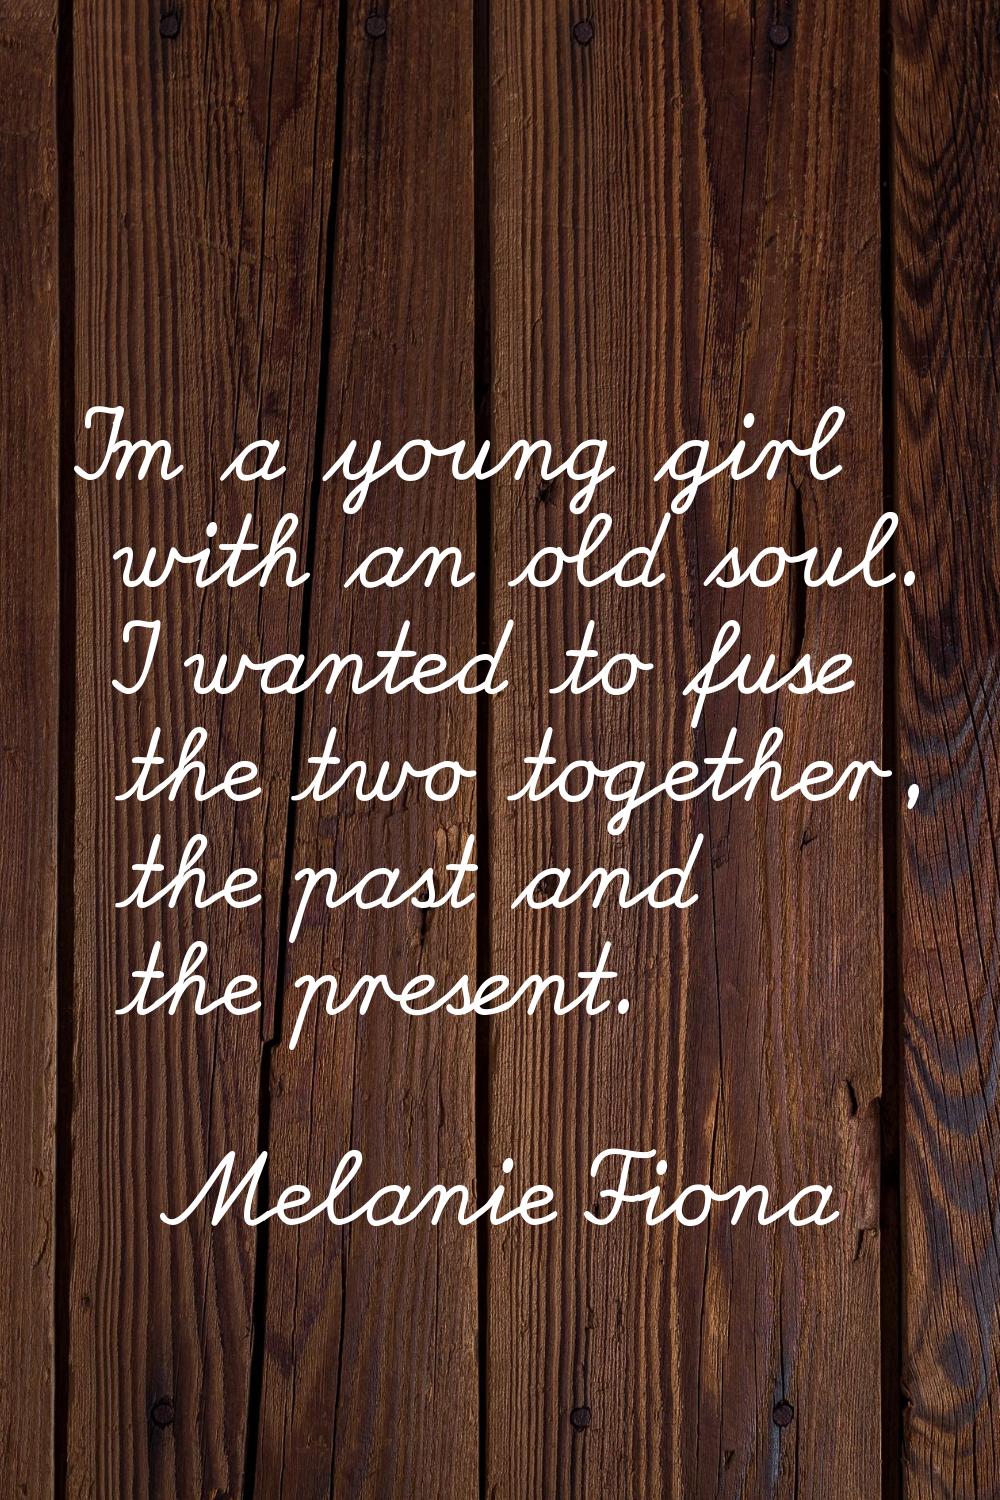 I'm a young girl with an old soul. I wanted to fuse the two together, the past and the present.